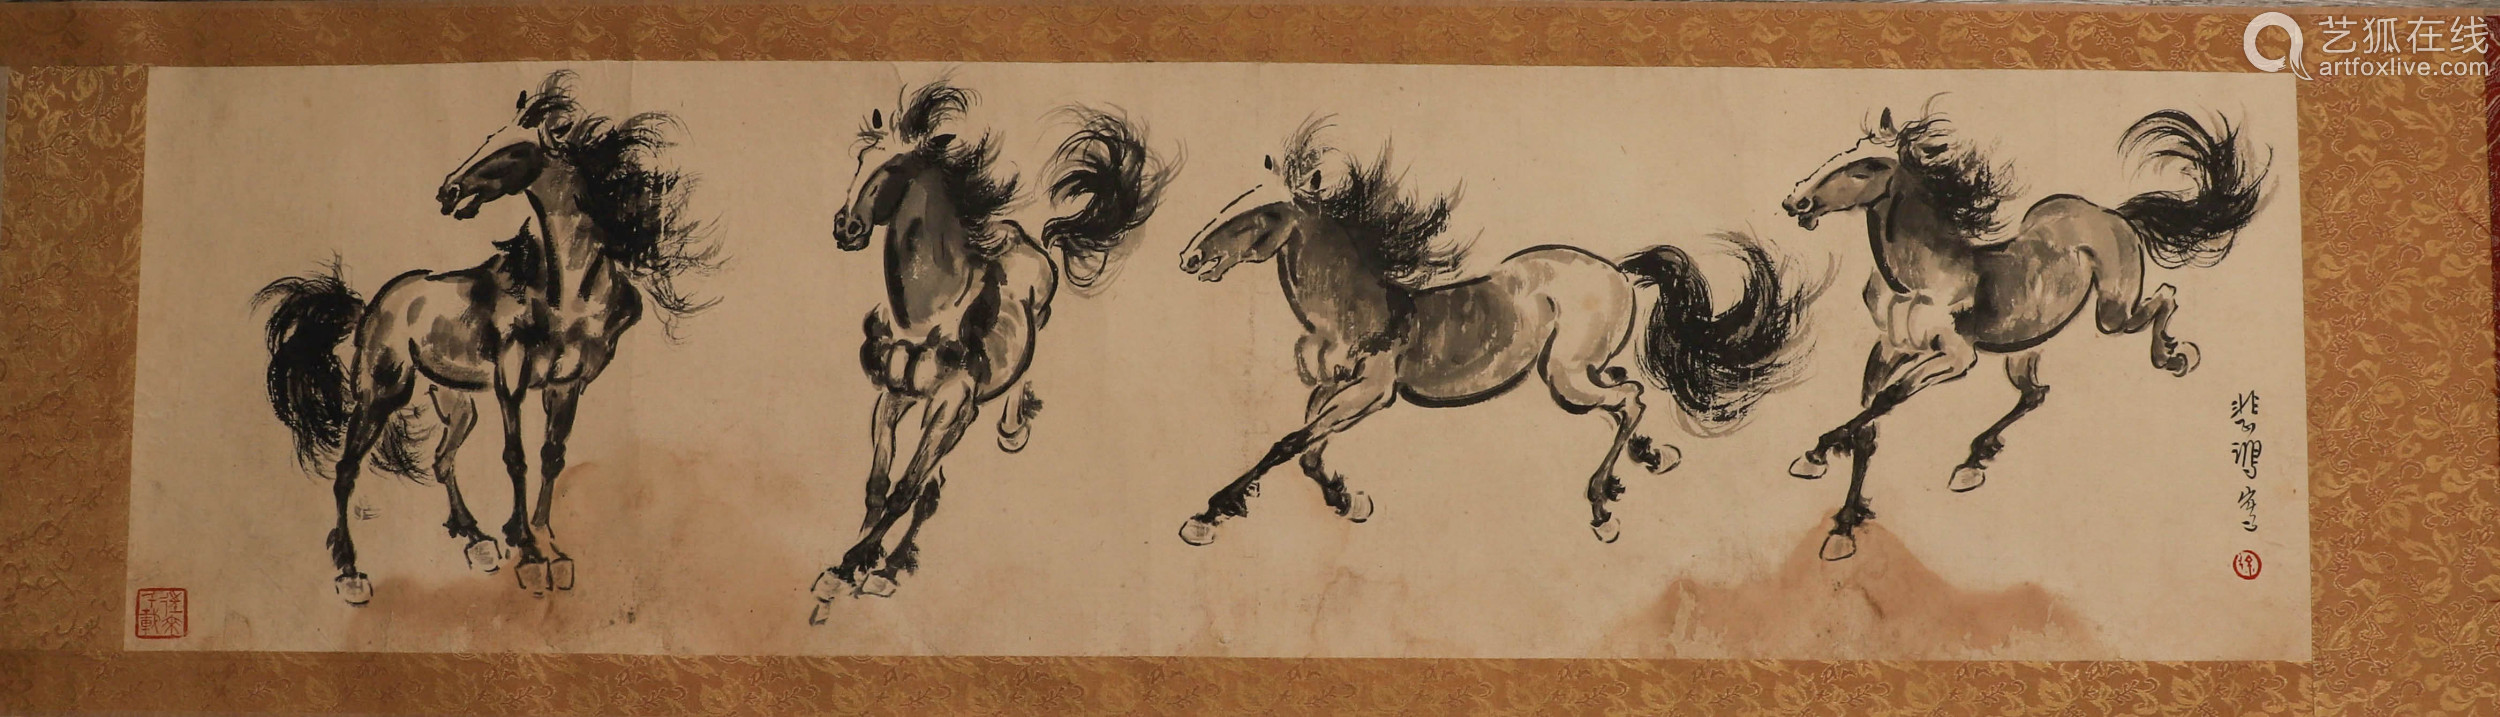 Long scroll of Xu Beihong's galloping horse in Chinese ink p...